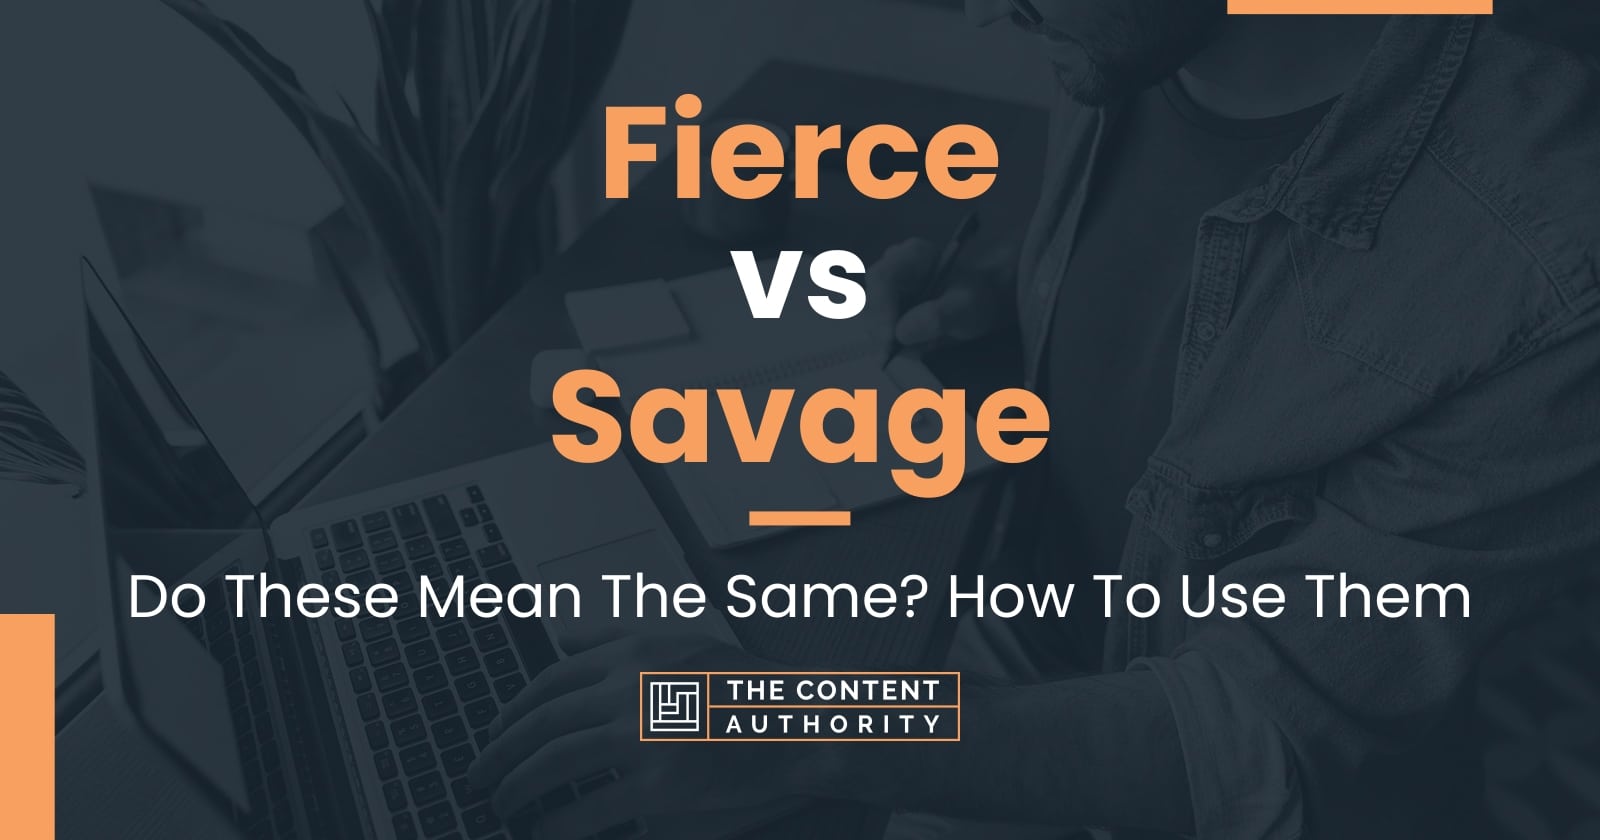 Fierce vs Savage: Do These Mean The Same? How To Use Them